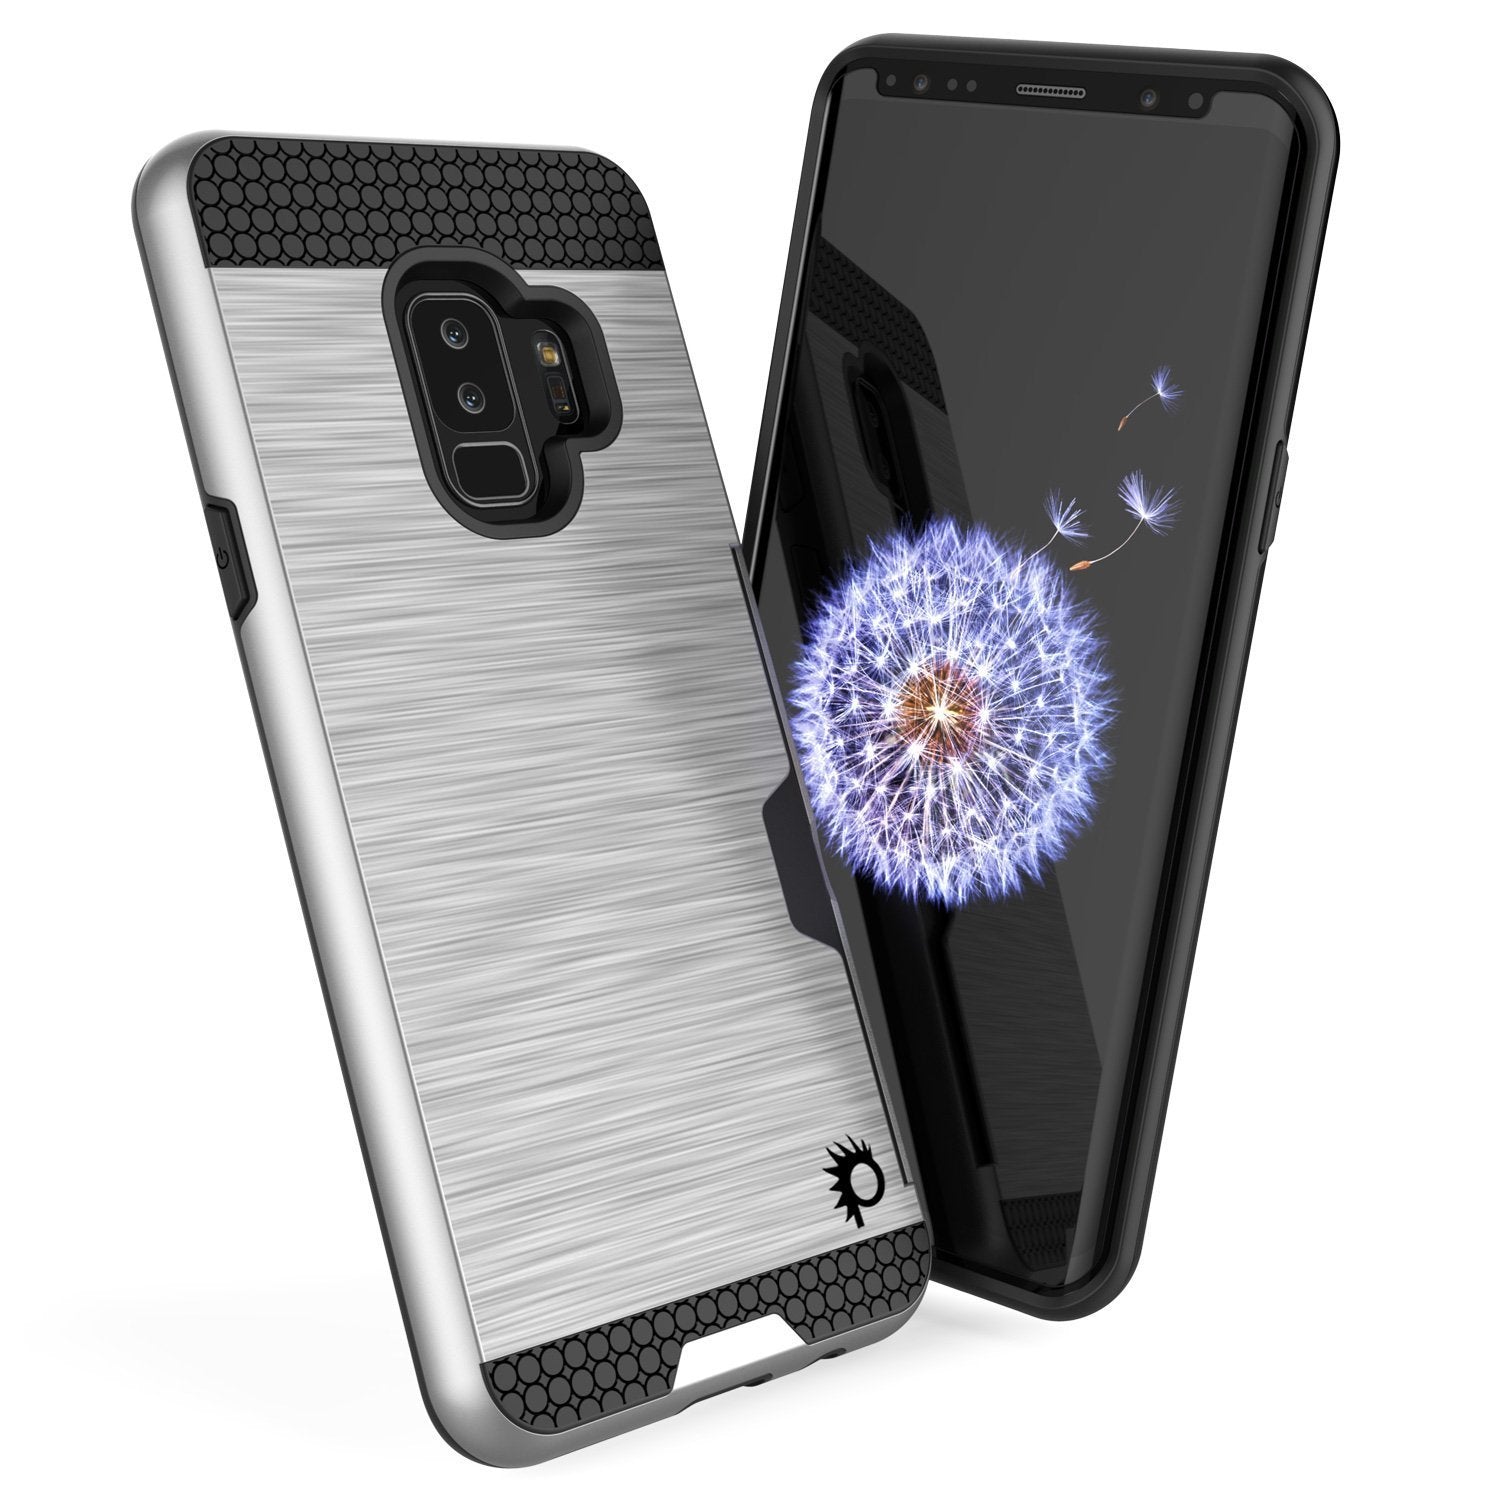 Galaxy S9 Plus Case, PUNKcase [SLOT Series] [Slim Fit] Dual-Layer Armor Cover w/Integrated Anti-Shock System, Credit Card Slot [Silver] - PunkCase NZ